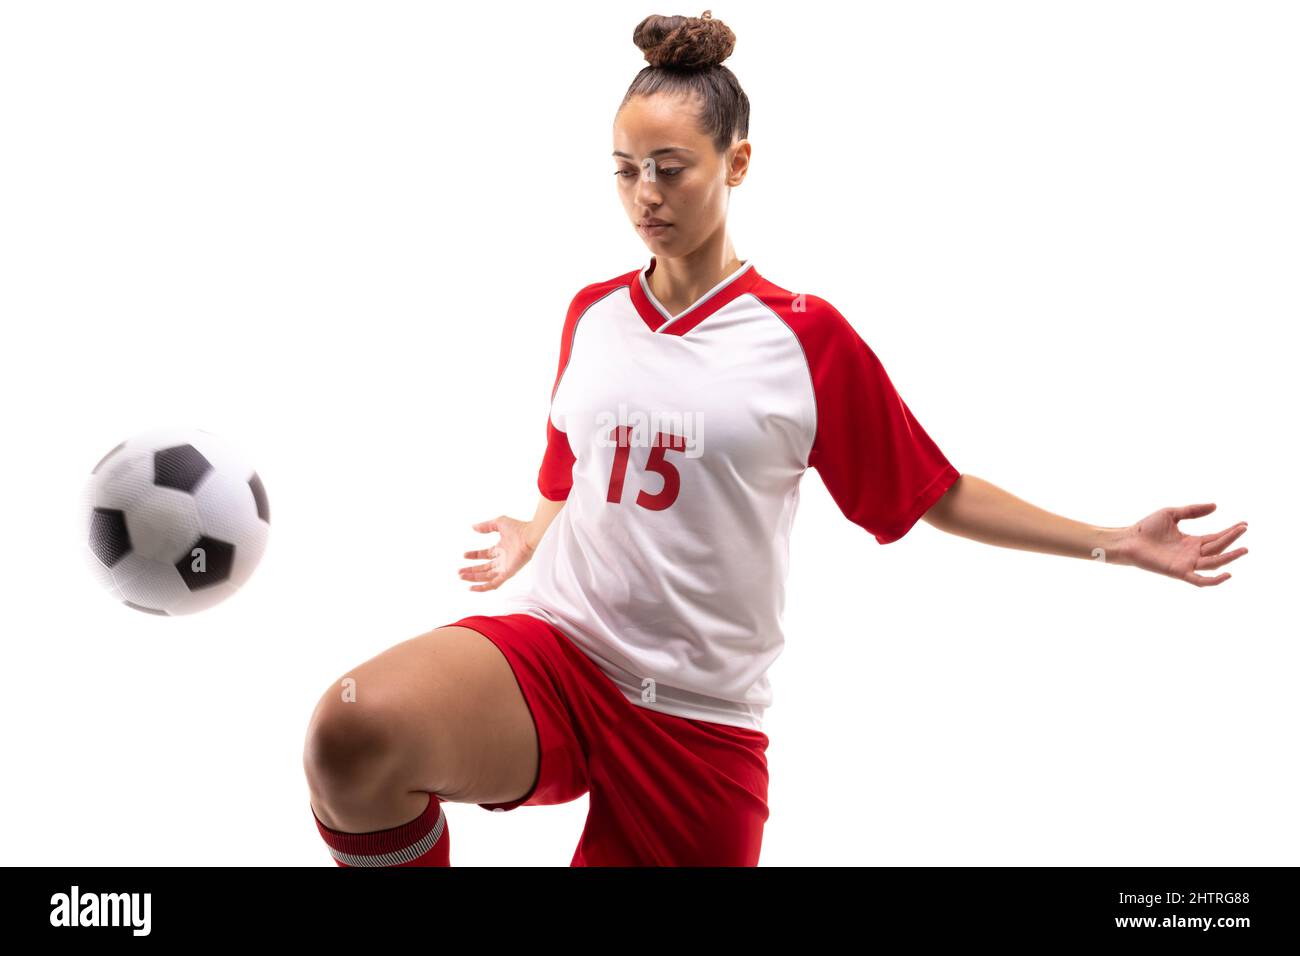 Faceless person standing with soccer ball between legs on grass · Free  Stock Photo